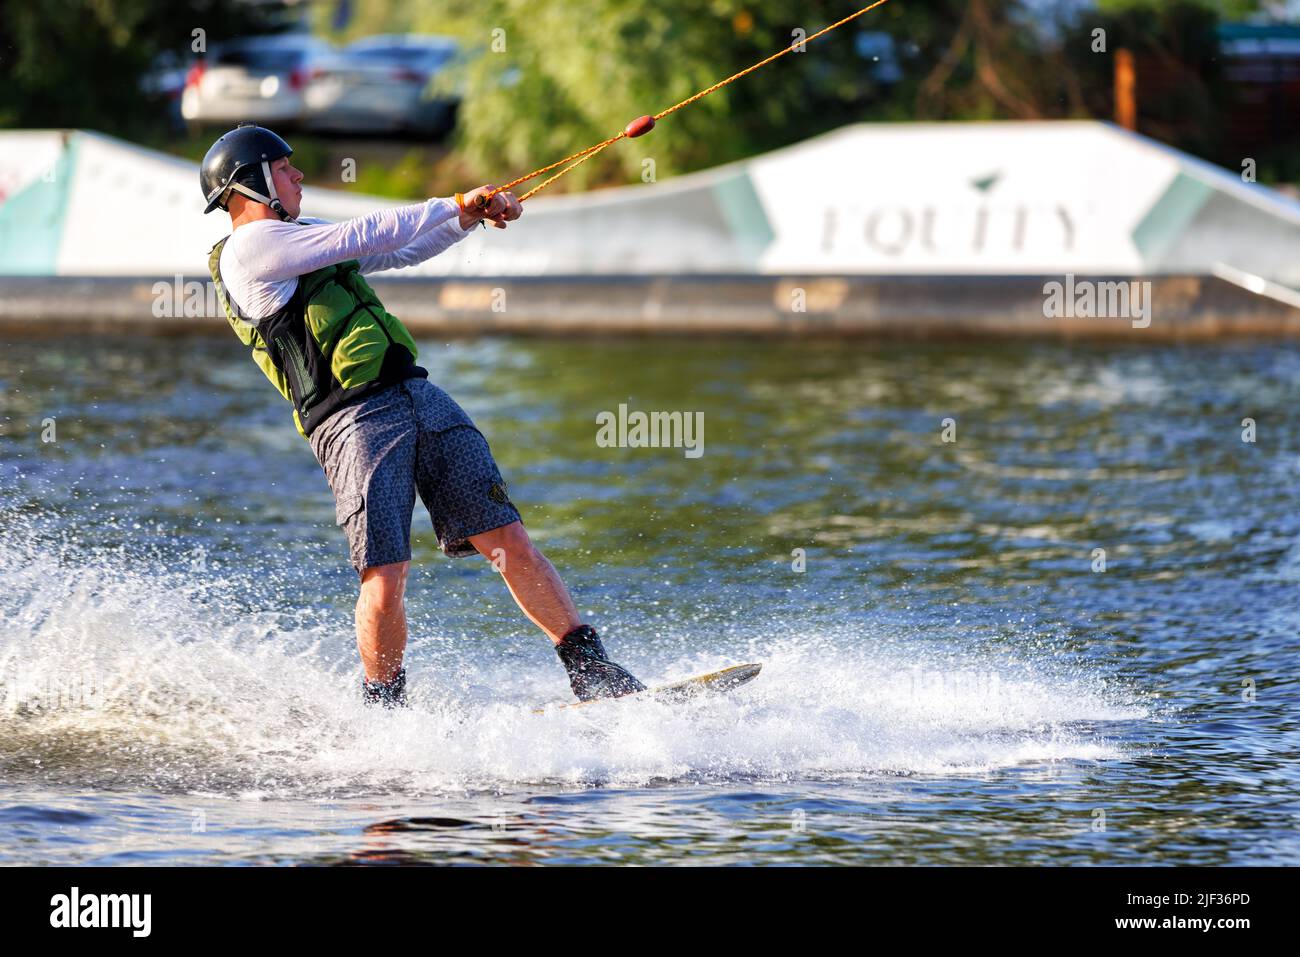 A wakeboarder in a black protective helmet and a green vest rides dynamically on a water board in a summer river bay. 06.19.1922. Kyiv. Ukraine. Stock Photo